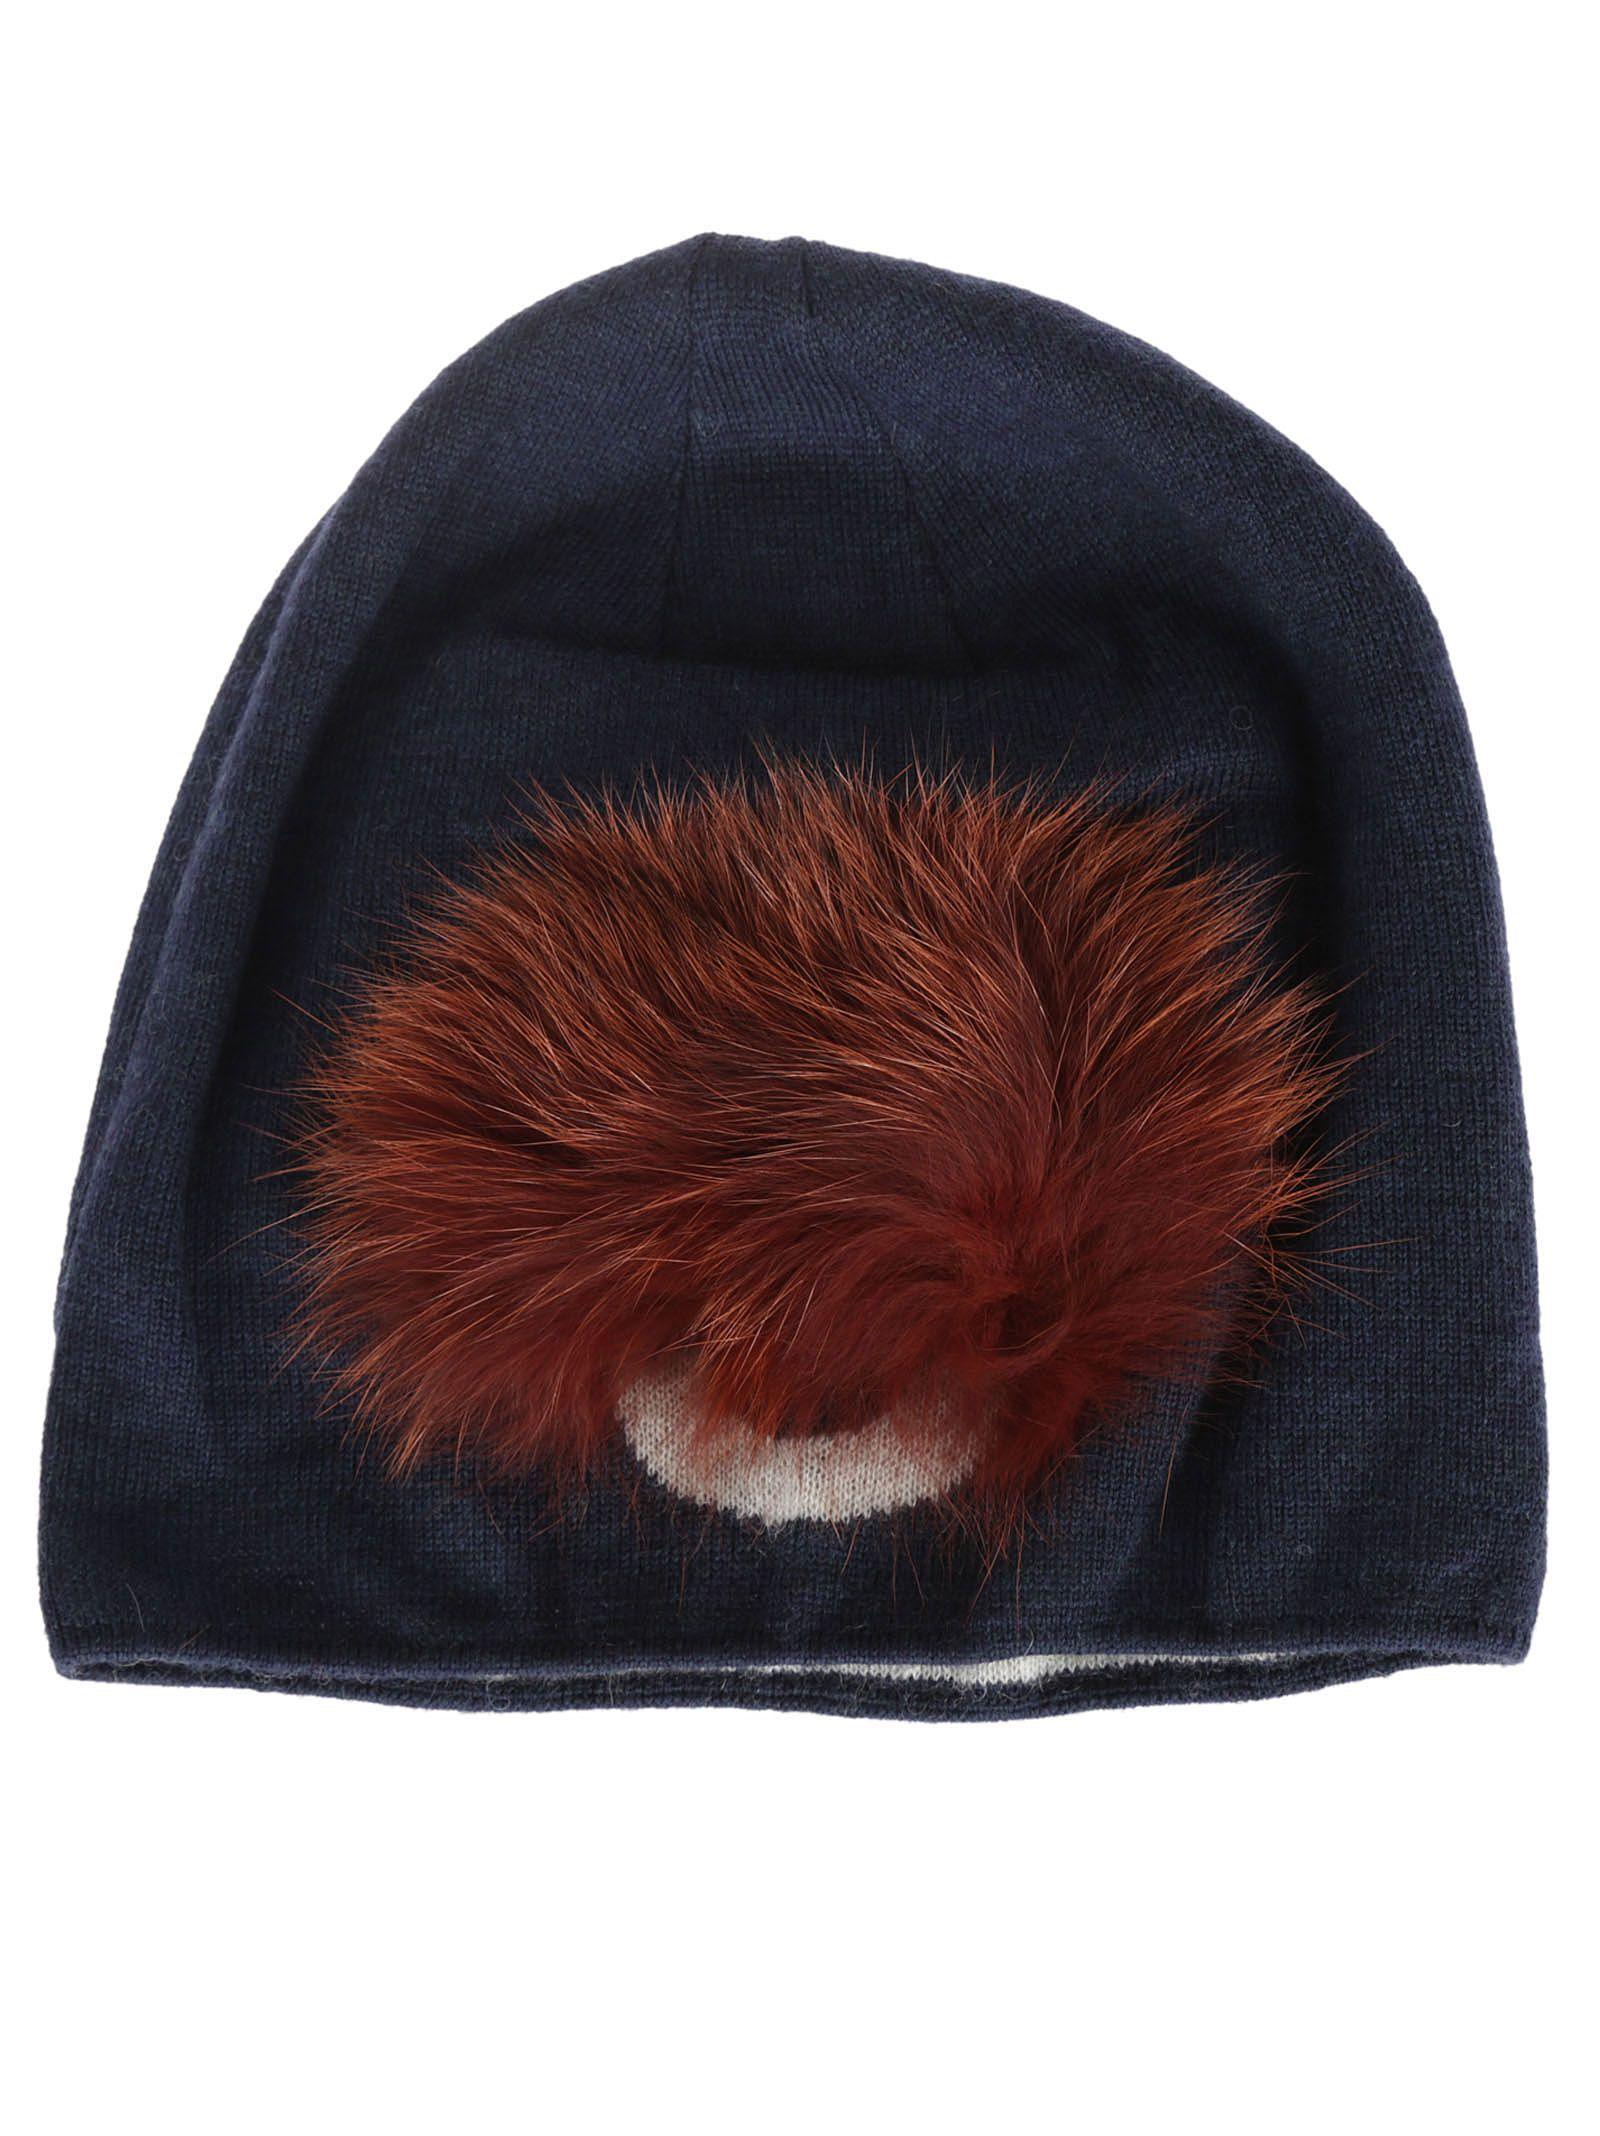 Fendi Hat Knit Fabric+fur In F0vlpeacock Color | ModeSens